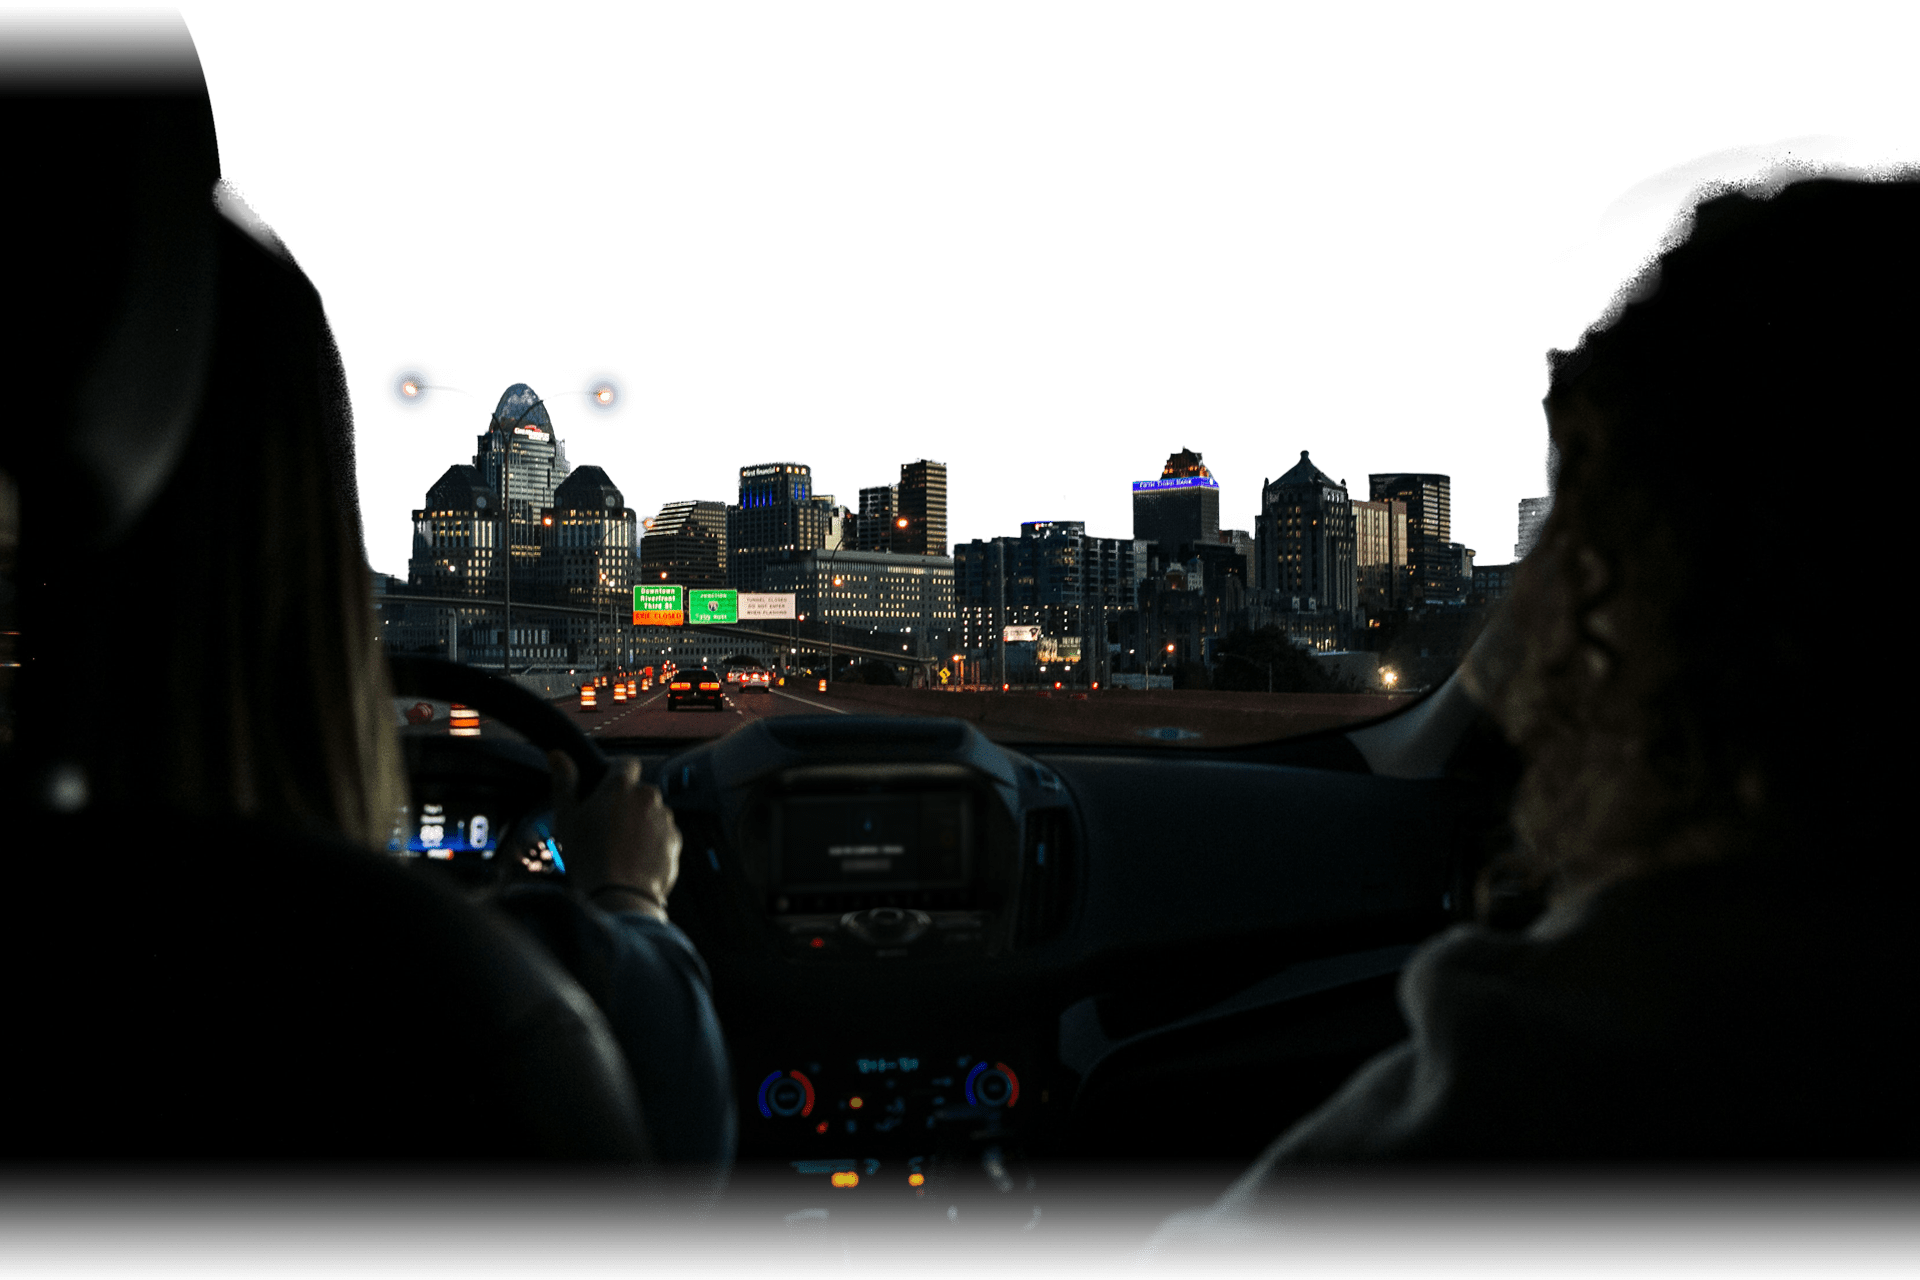 a view of driving into a city center from within a vehicle at night with electric blue highlights on the head unit alerting about curfew